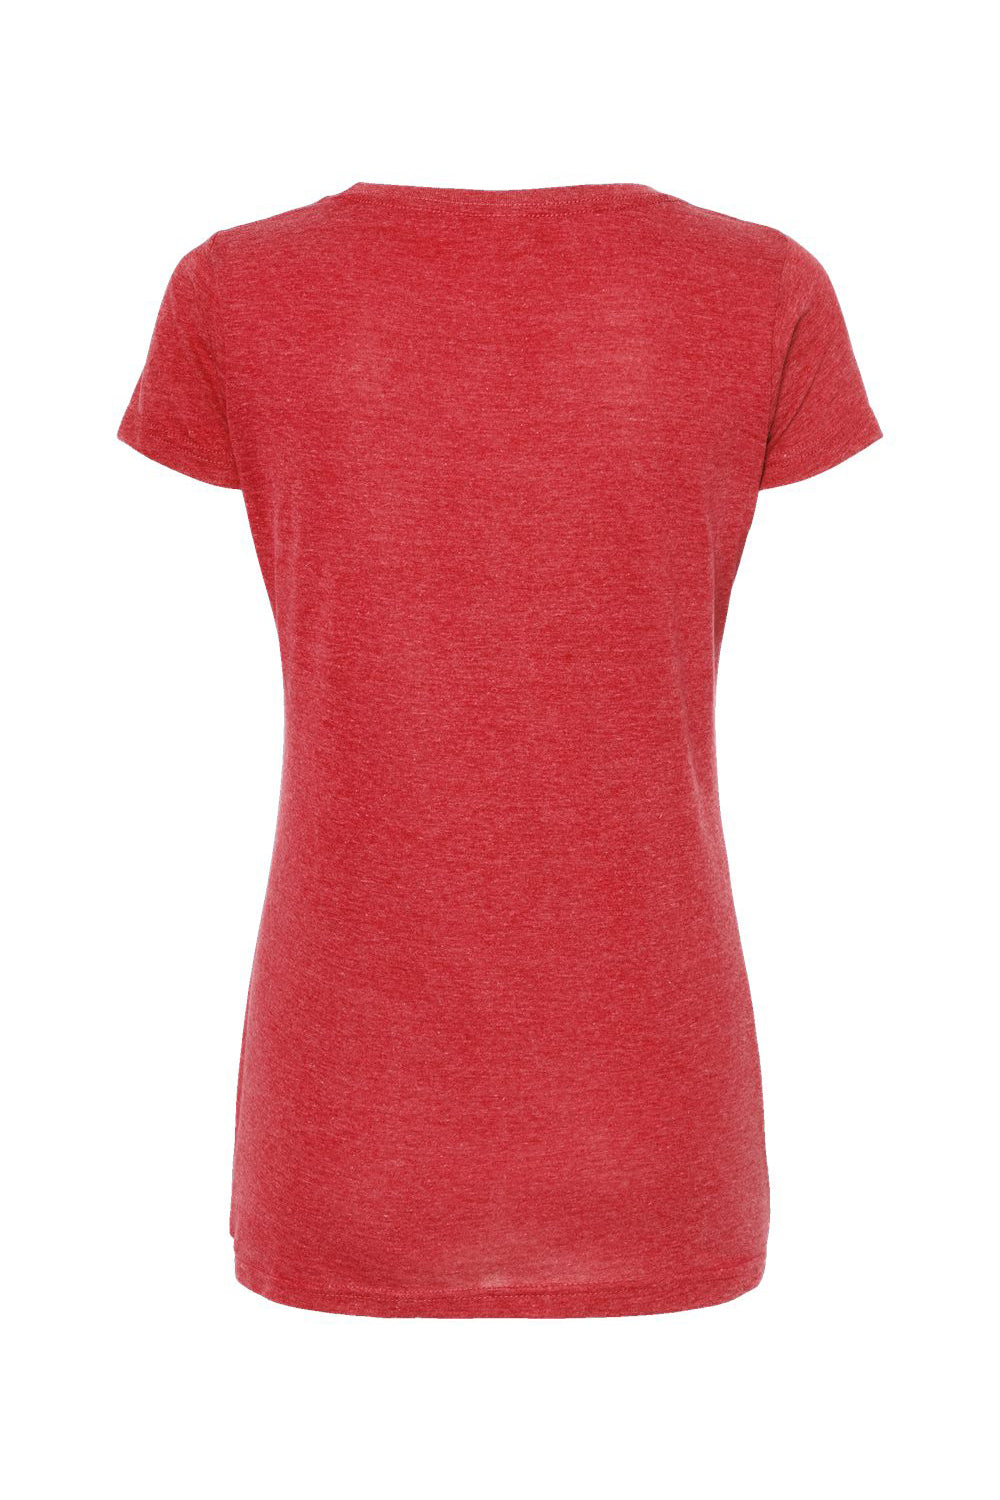 Tultex 243 Womens Poly-Rich Short Sleeve Scoop Neck T-Shirt Heather Red Flat Back